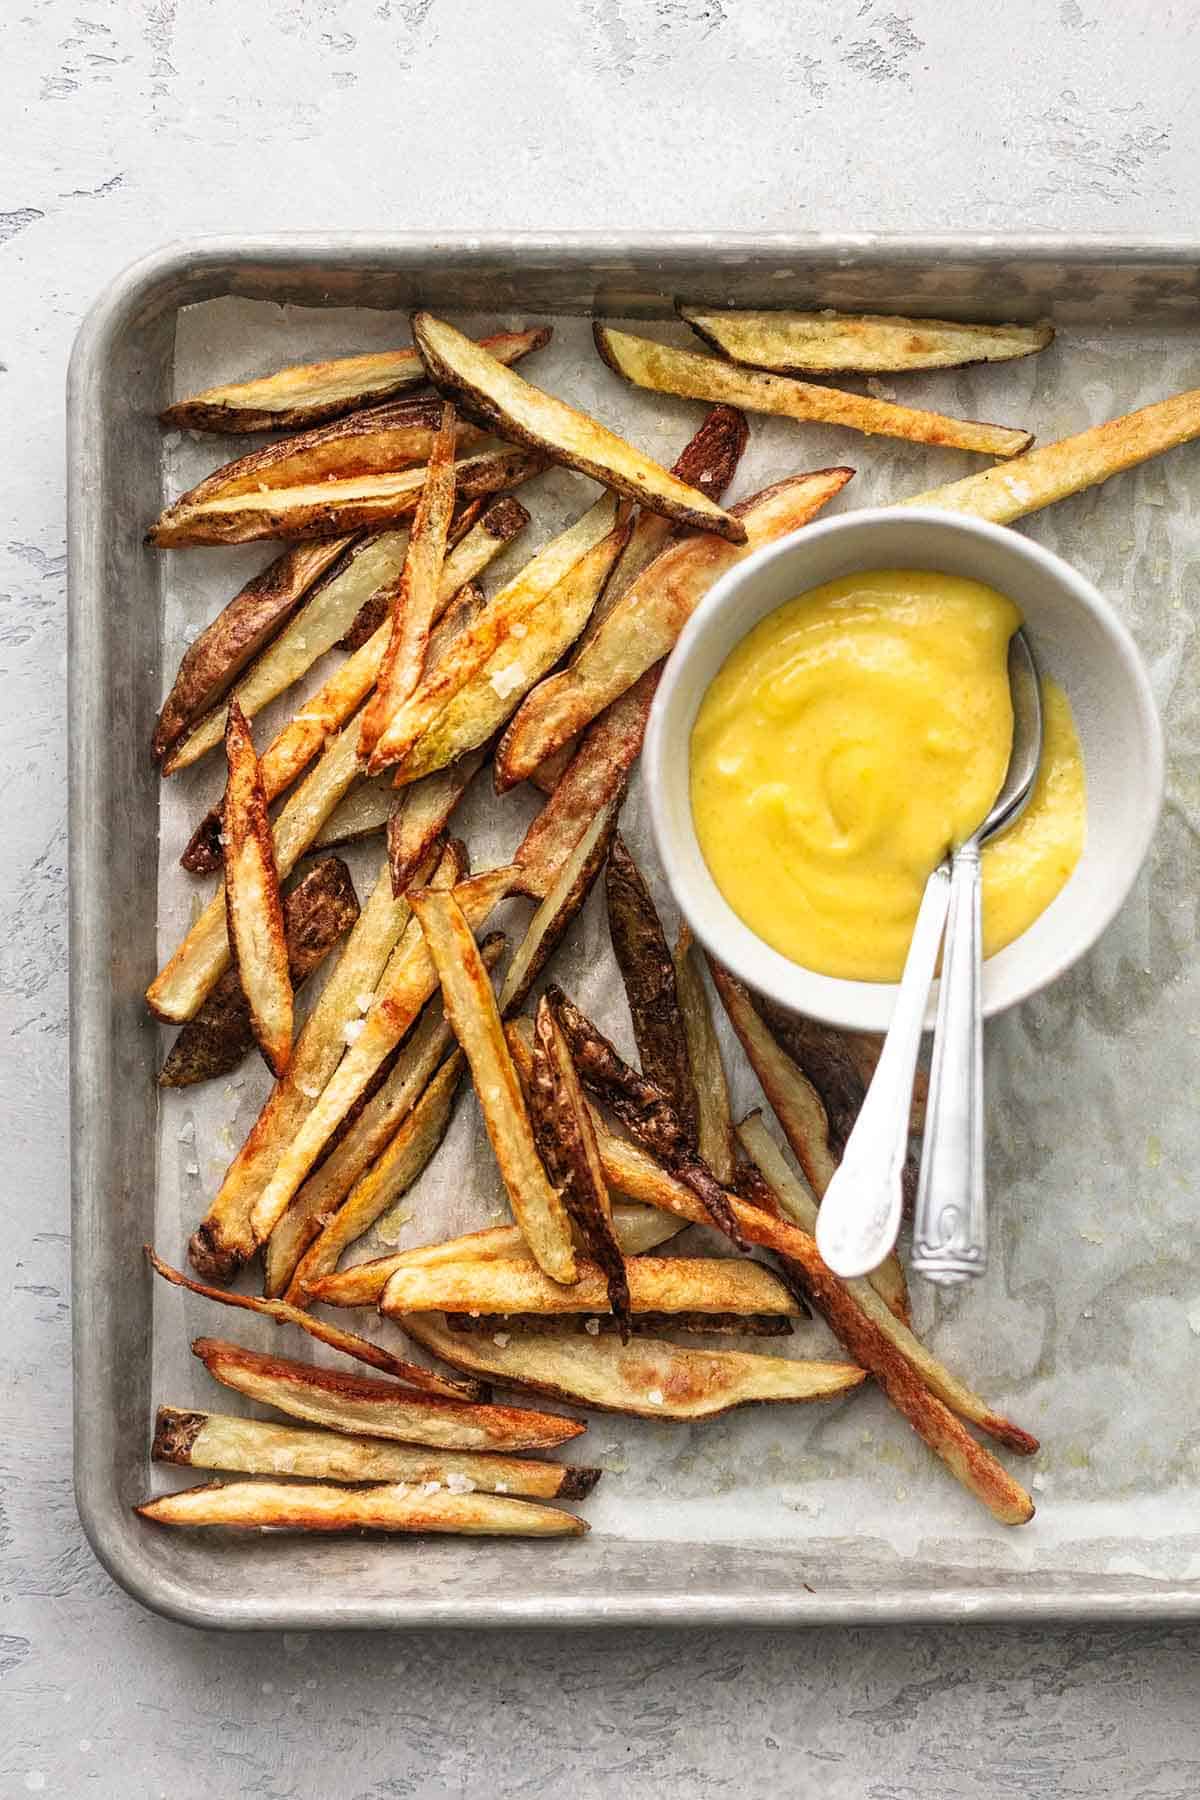 top view of a baking sheet with crispy french fries and small bowl of garlic aioli.